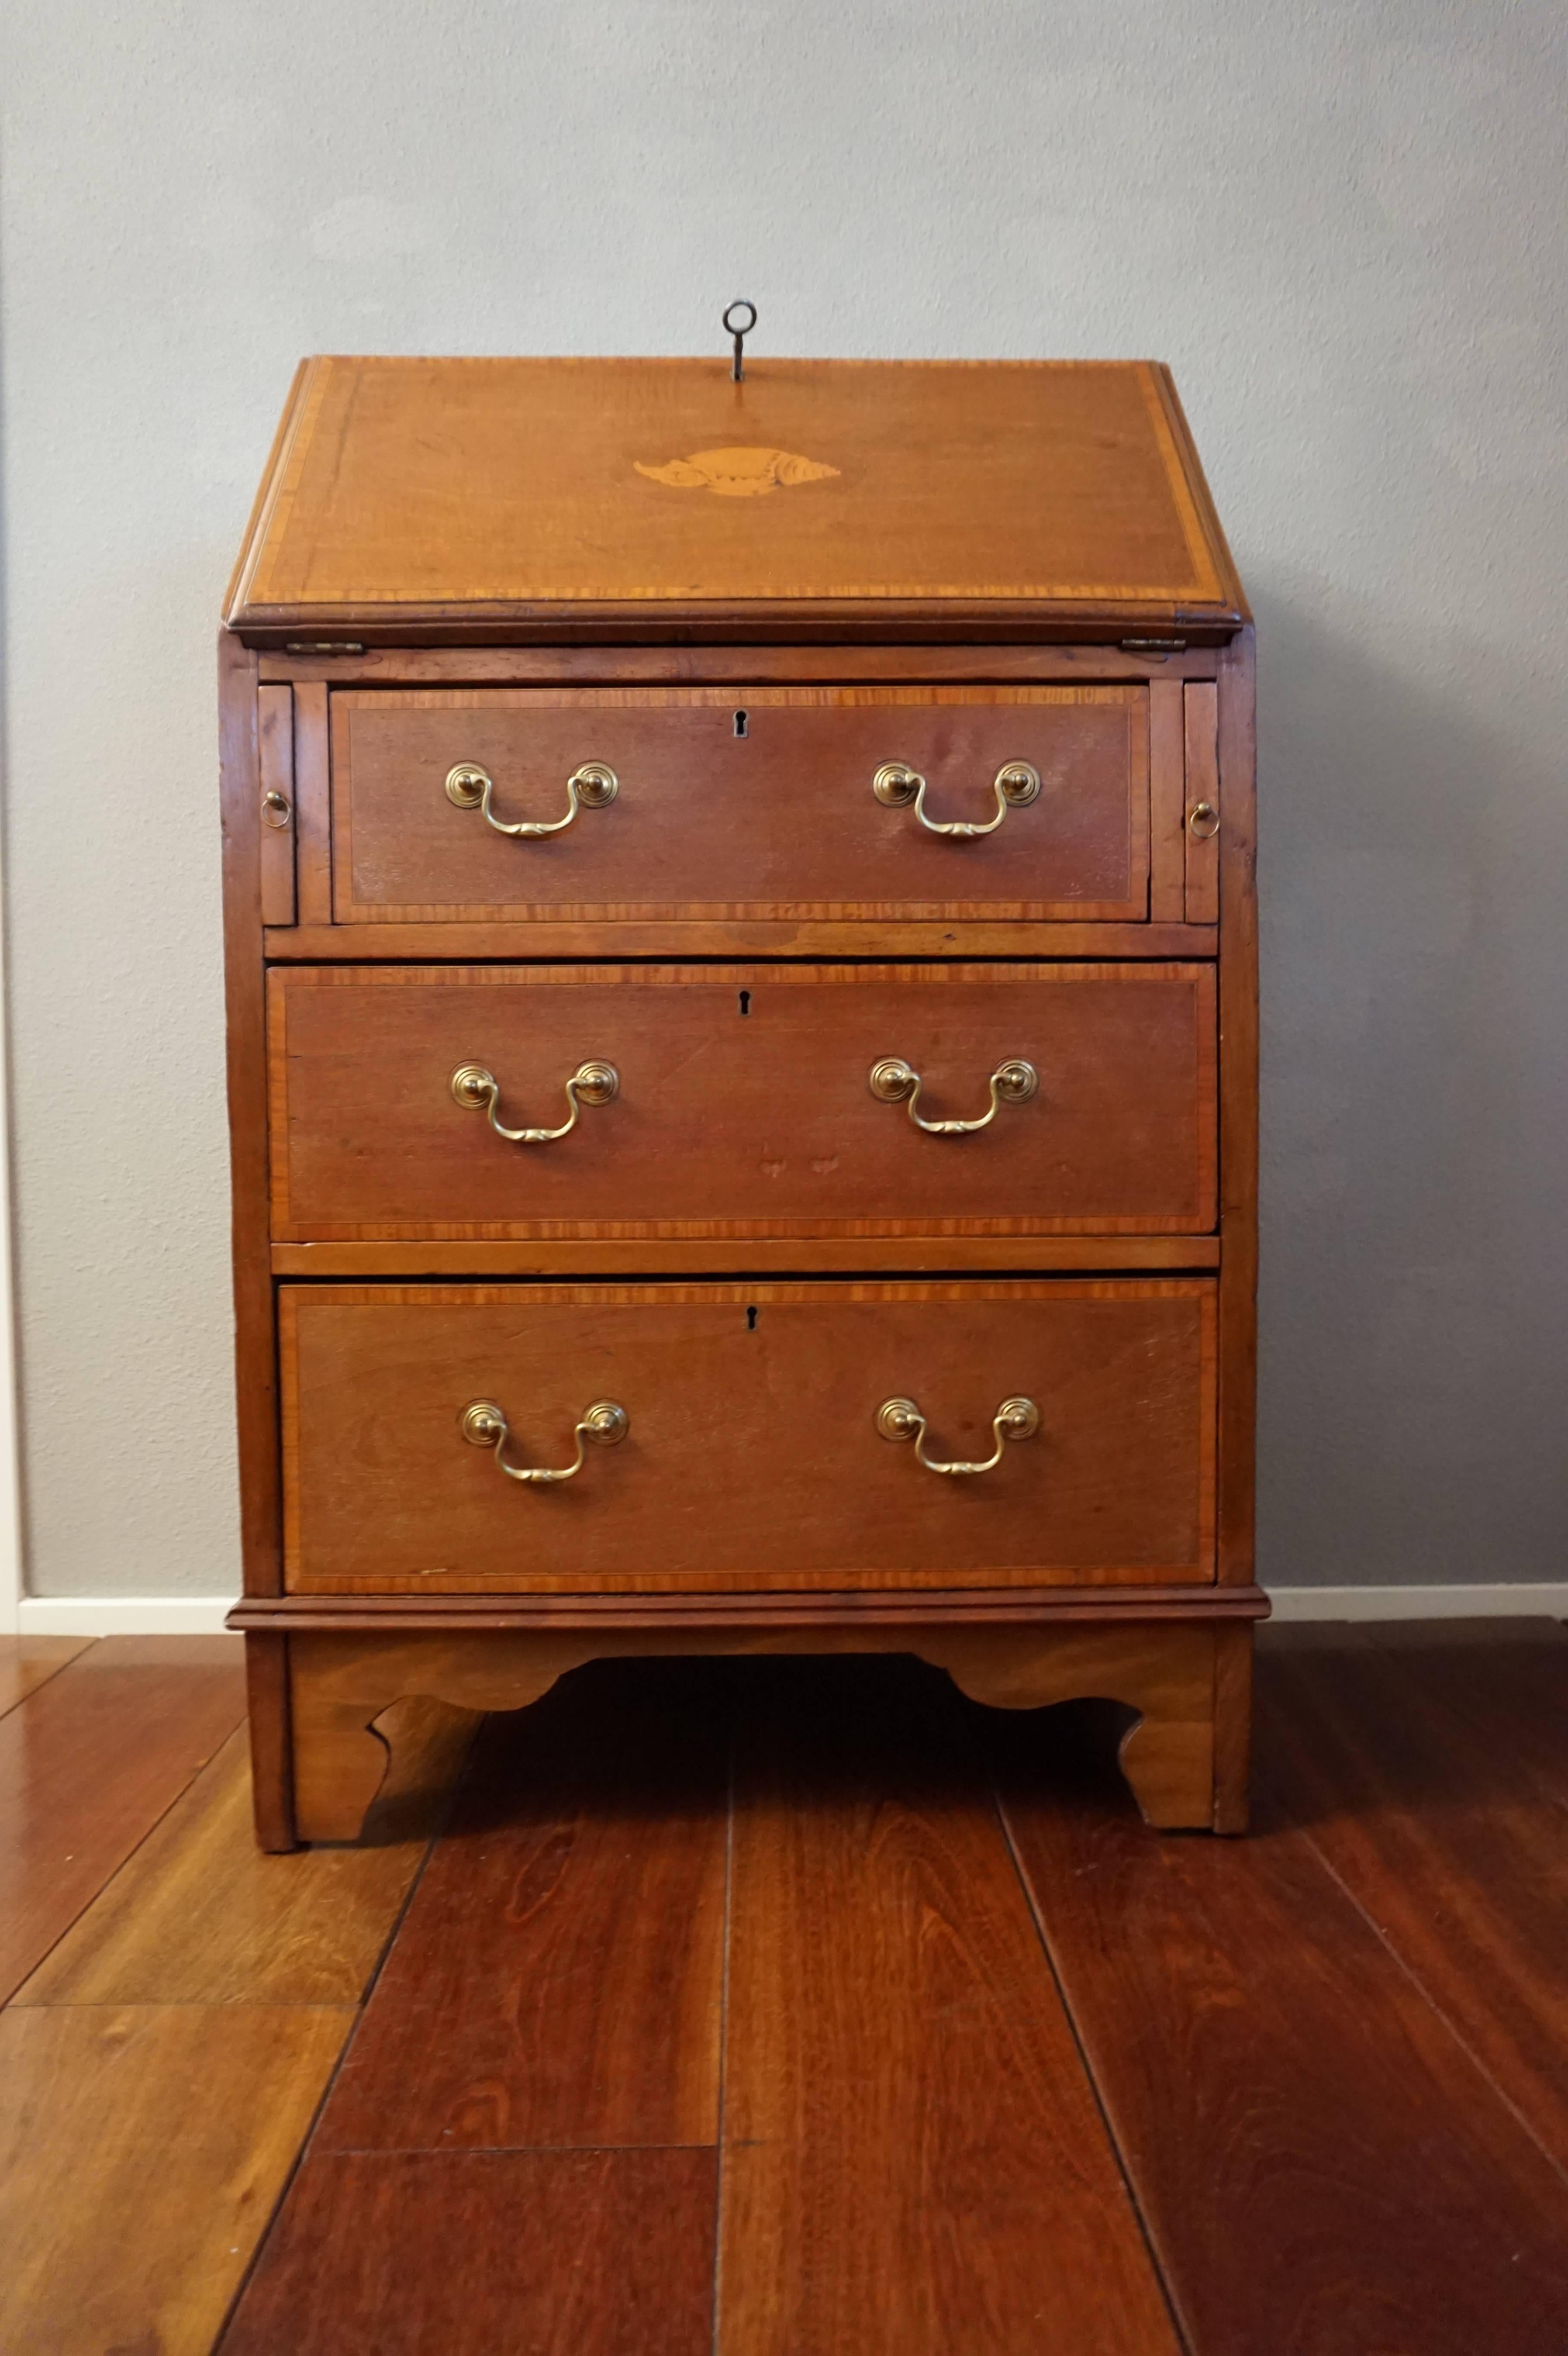 Practical small desk with a built-in chest of drawers.

Because of the large homes that many of the rich who could afford quality furniture lived in, many antique pieces of furniture are relatively large. Since that is not always practical in this